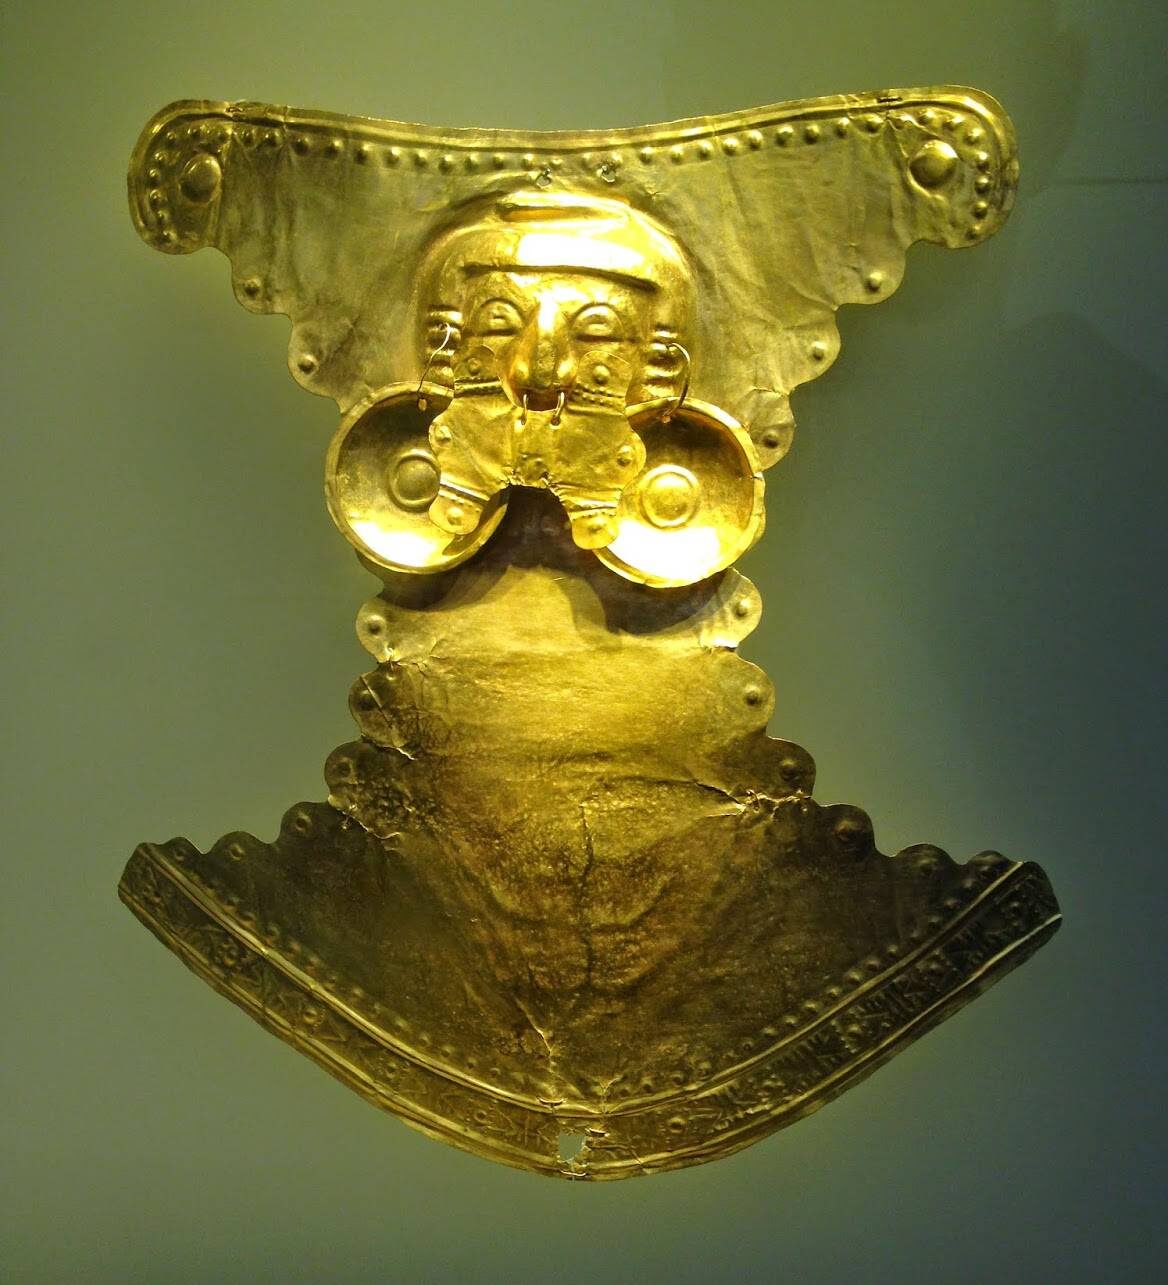 Gold artifact in the Gold Museum in Bogotá, Colombia